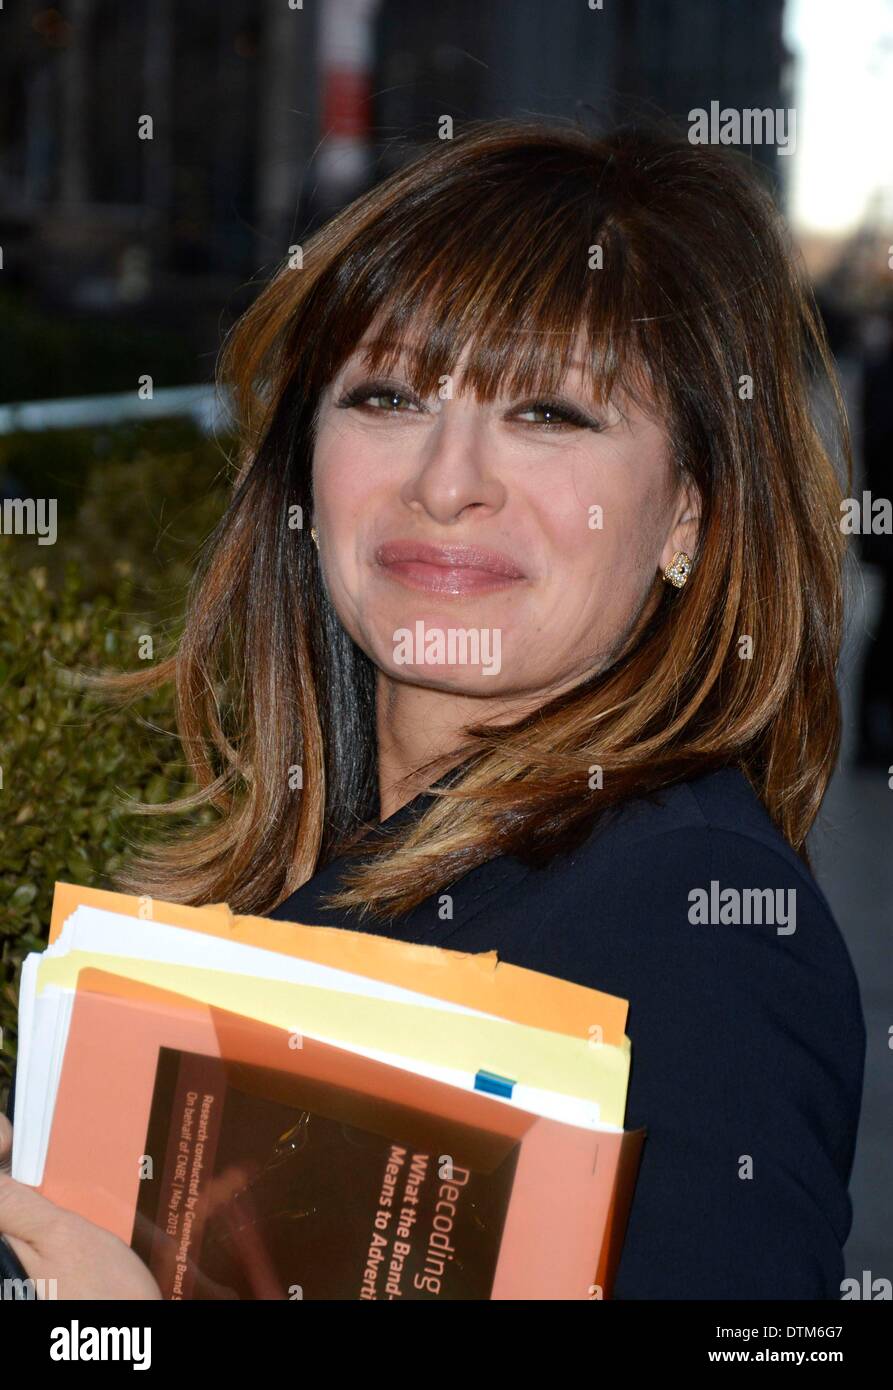 New York, NY, USA. 20th Feb, 2014. Maria Bartiromo at Fox News at talk show appearance for Celebrity Candids at NYC Morning Shows - THU, New York, NY February 20, 2014. Credit:  Derek Storm/Everett Collection/Alamy Live News Stock Photo